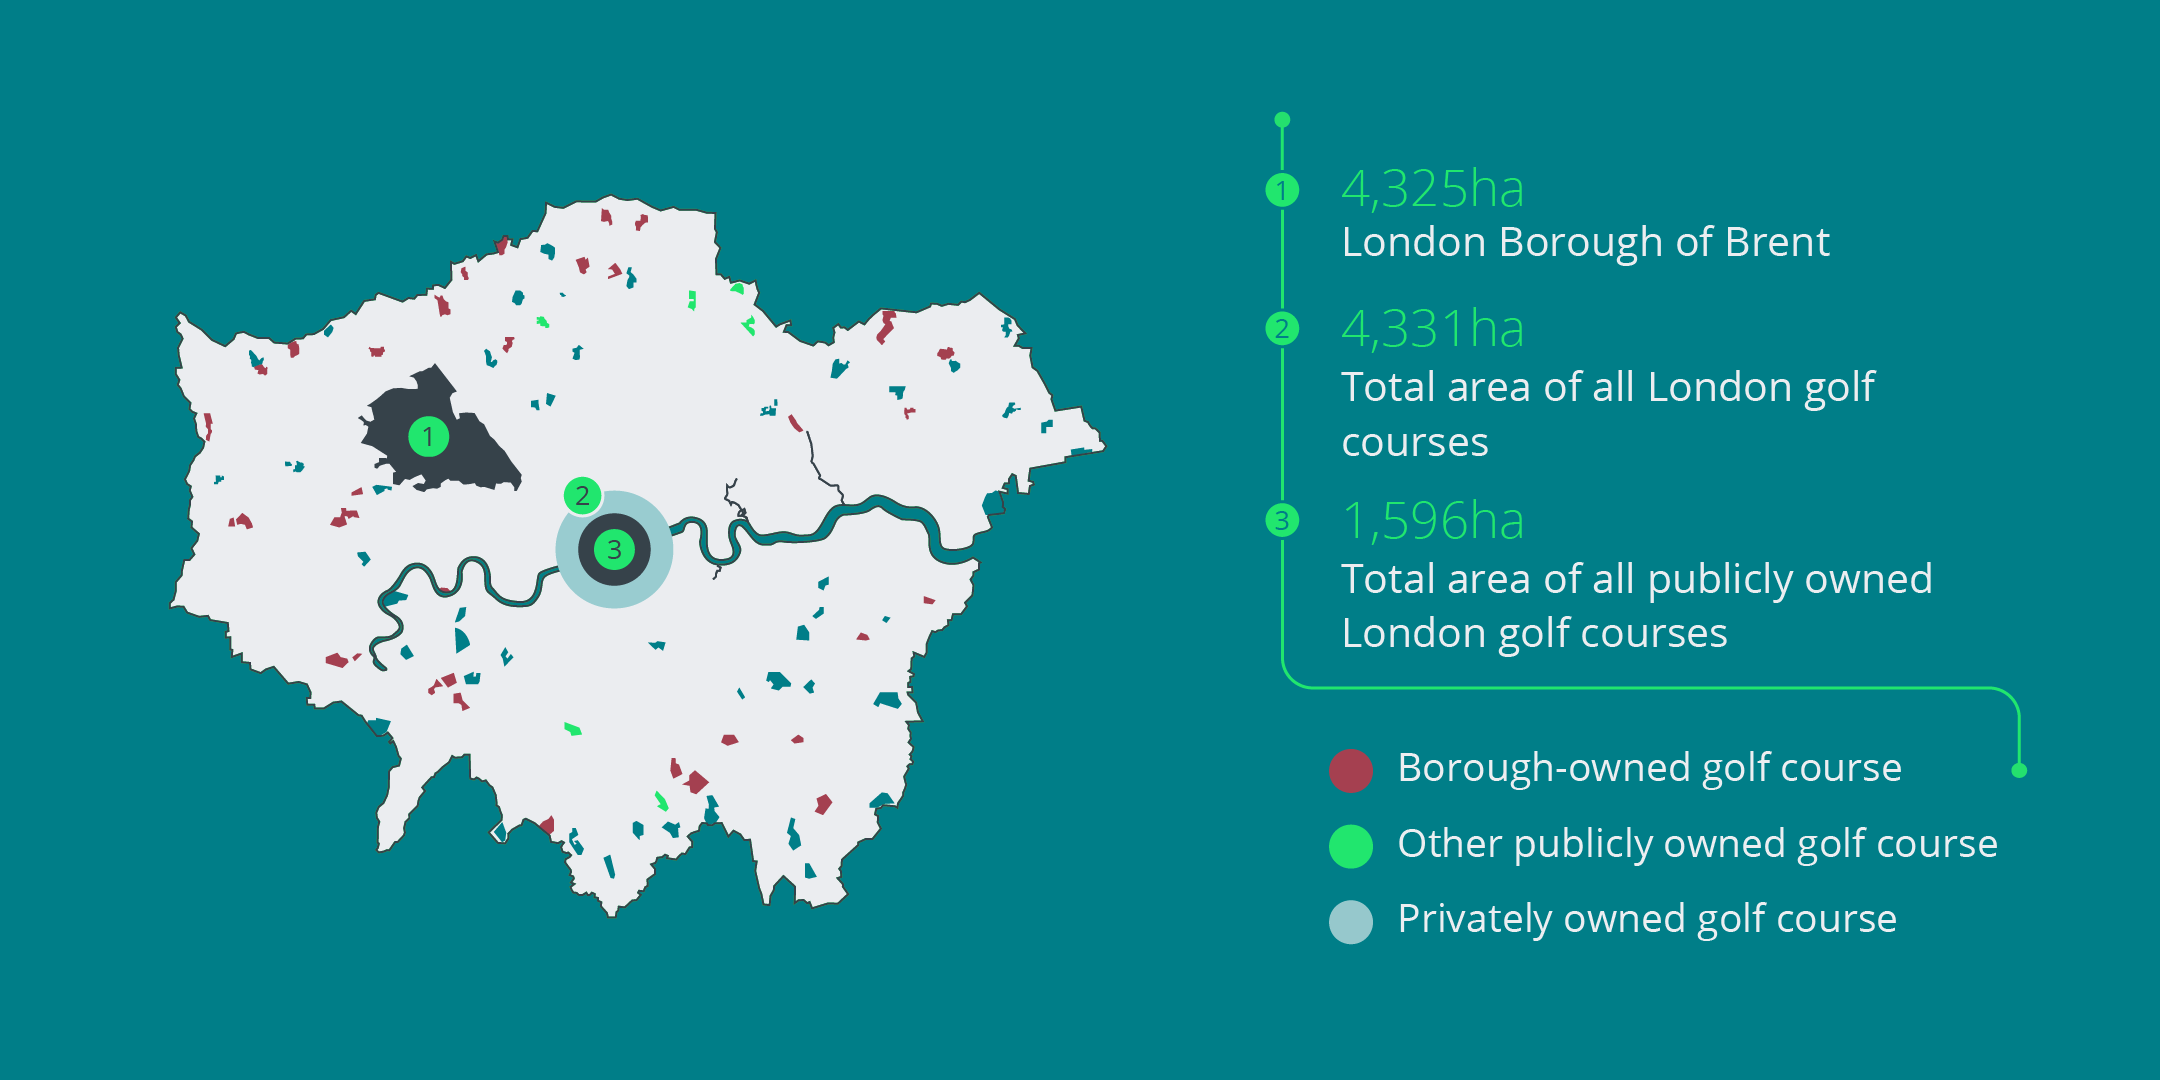 Map shows London Borough of Brent that covers 4,325ha, compared to total area of all London golf courses covering 4,331ha and total area of all publicly owned London golf courses covering 1,596ha 